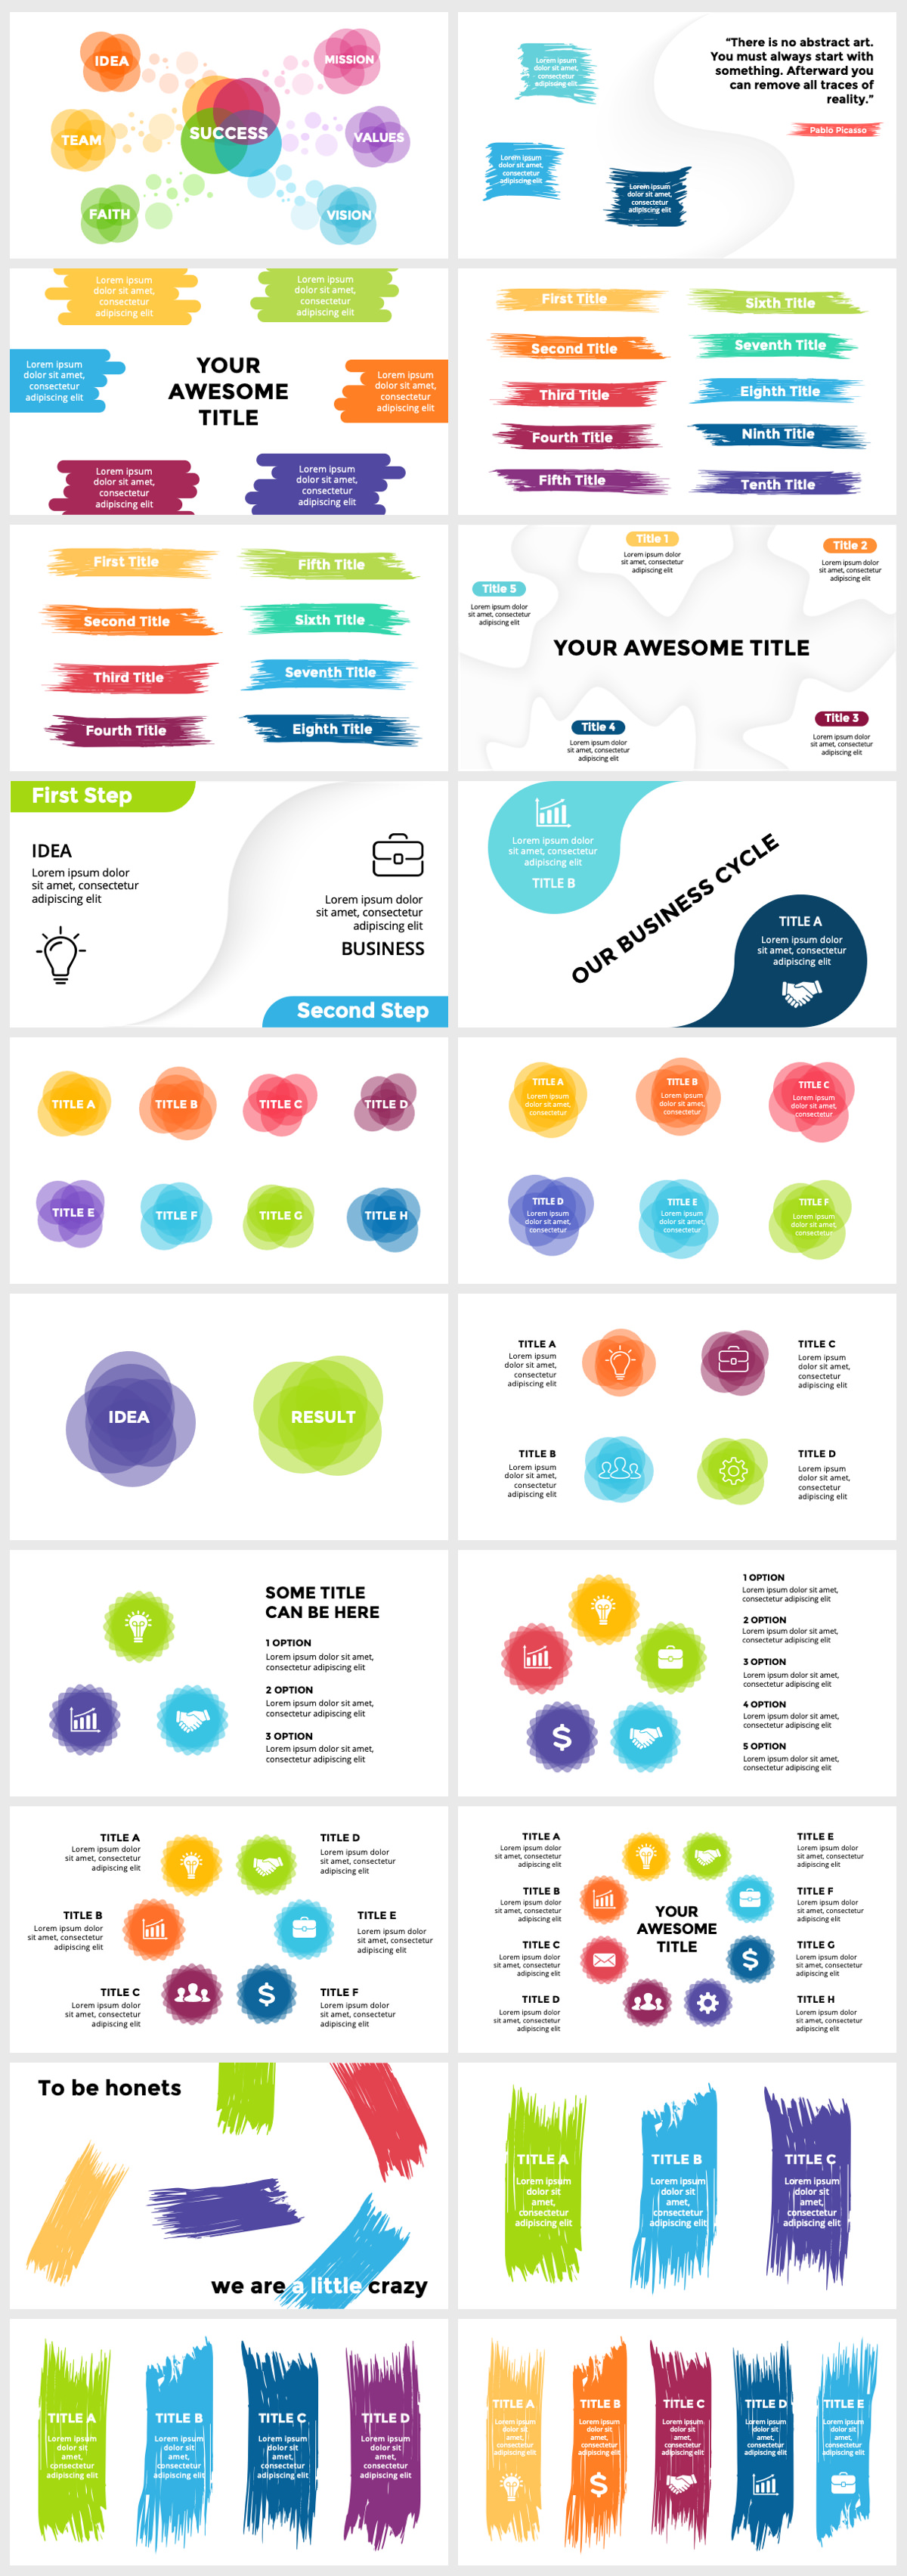 Wowly - 3500 Infographics & Presentation Templates! Updated! PowerPoint Canva Figma Sketch Ai Psd. - 331